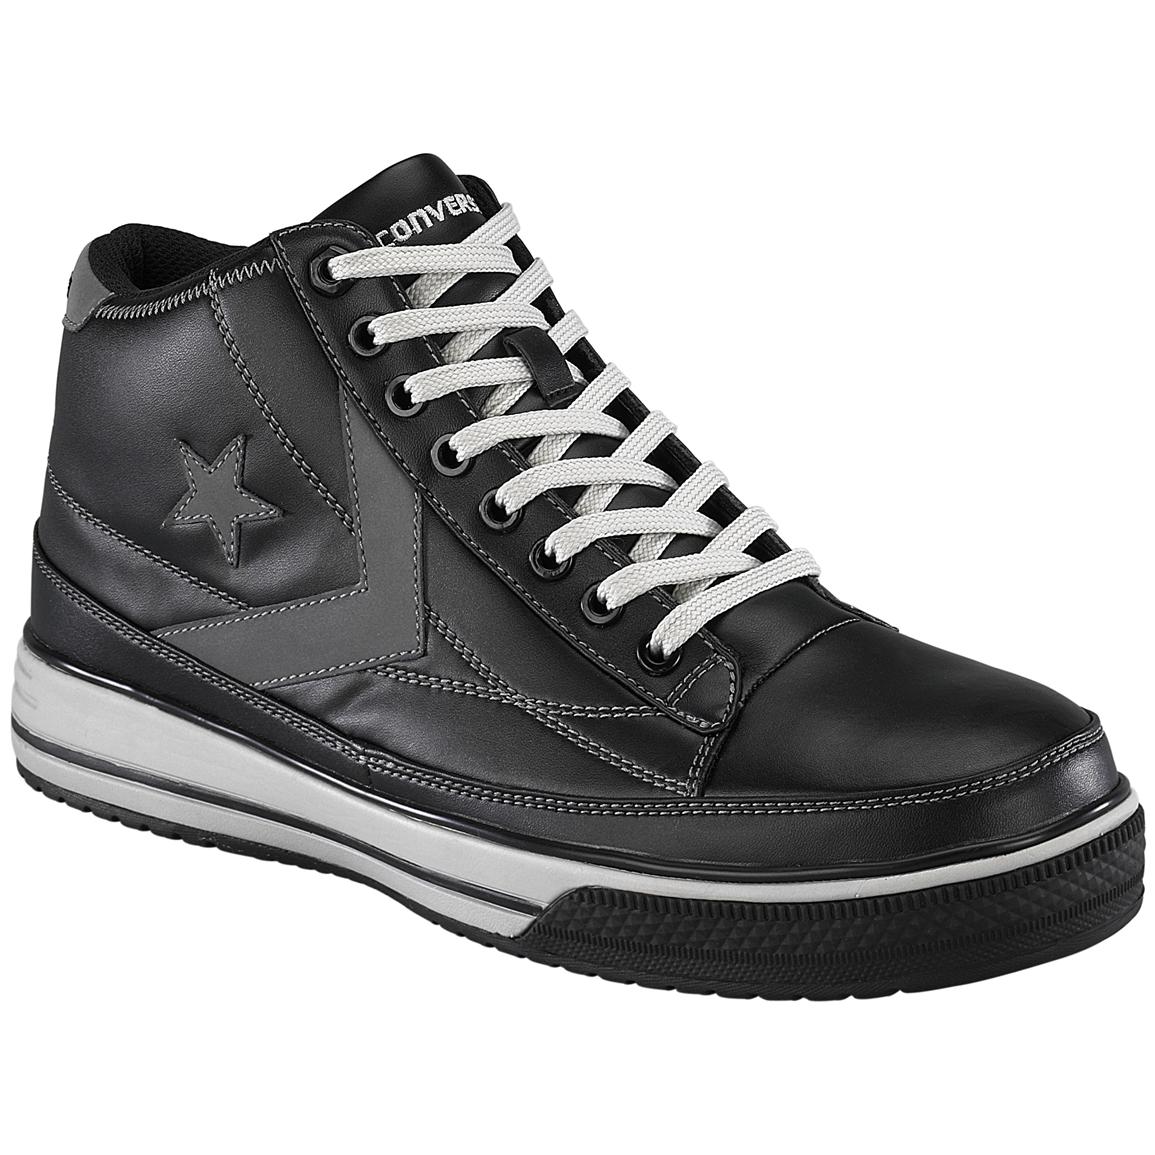 converse safety shoes composite toe